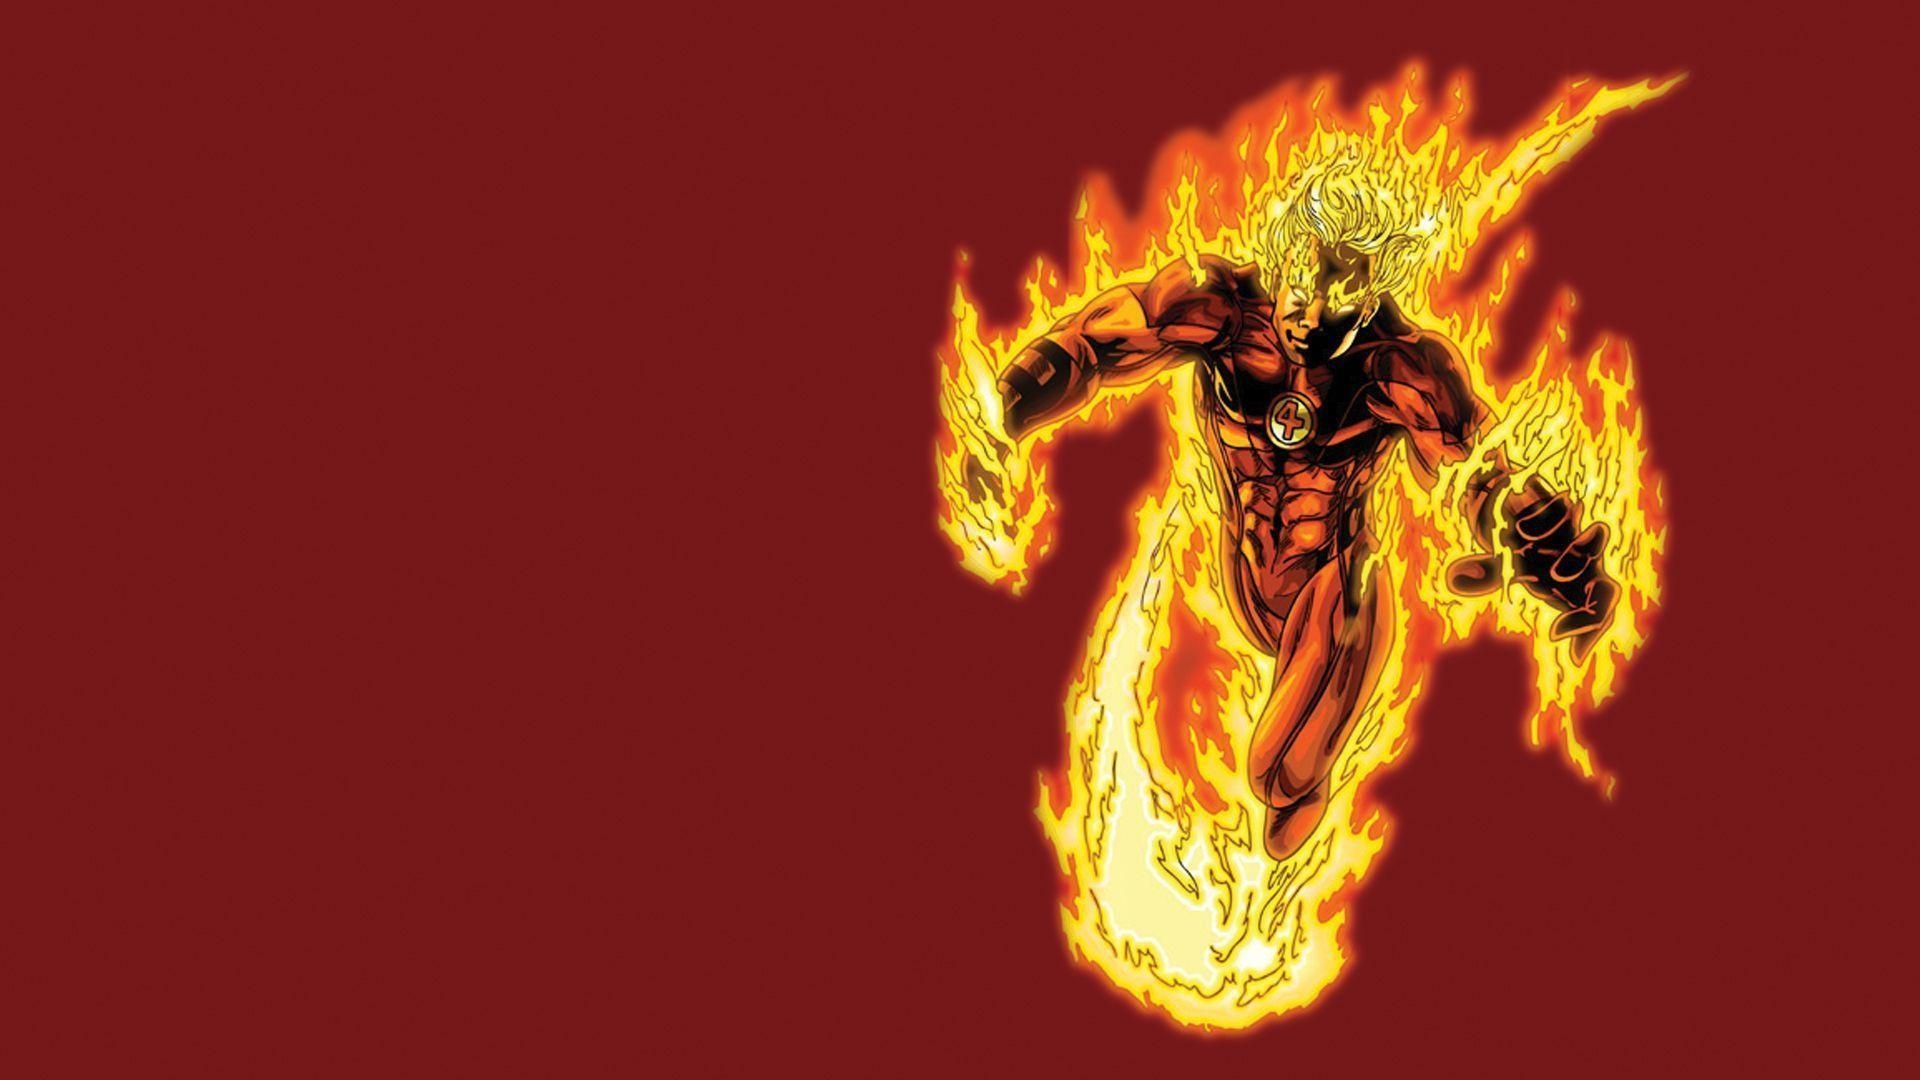 Johnny Storm, Torch, Wallpapers, Backgrounds, 1920x1080 Full HD Desktop